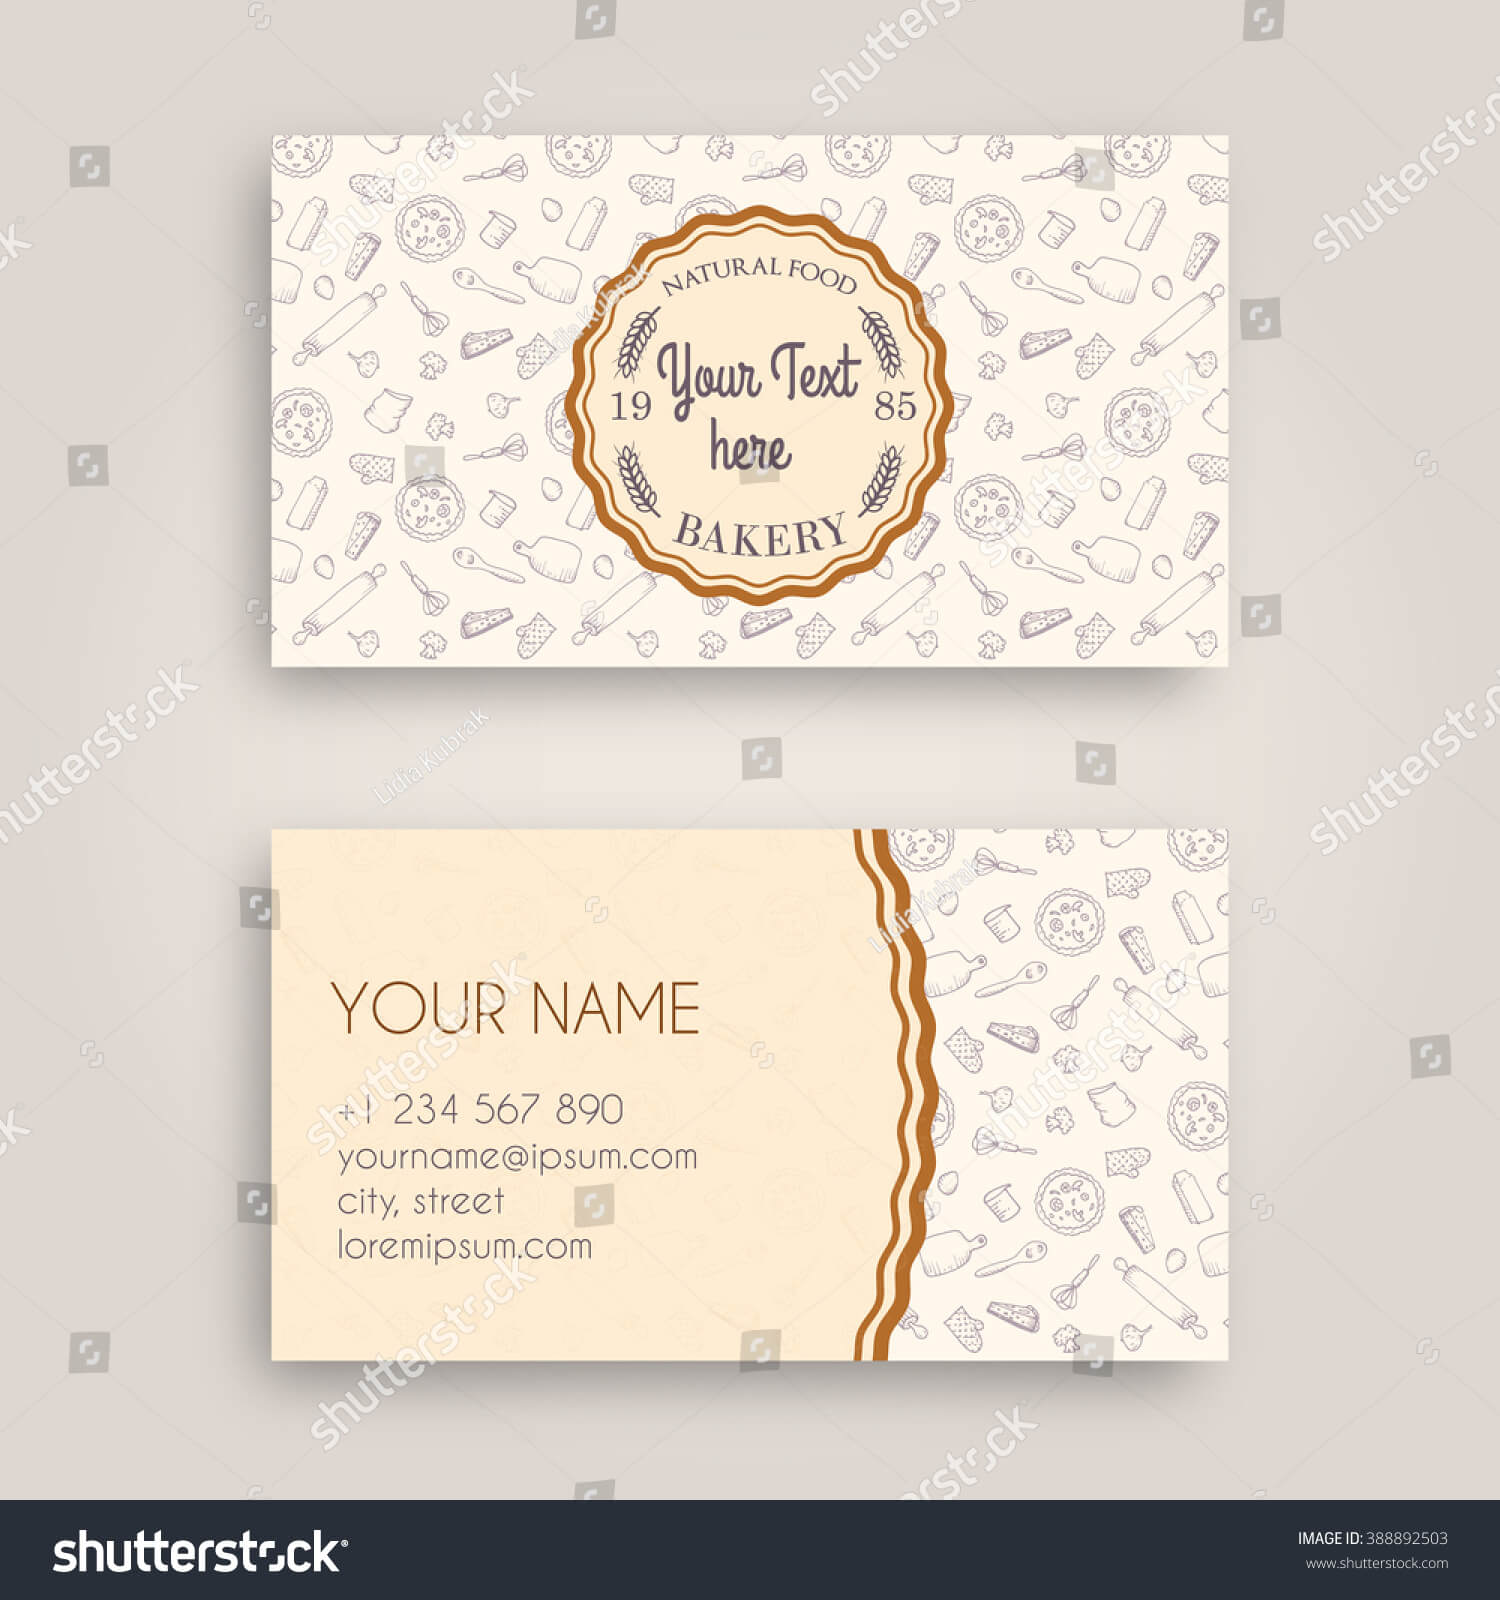 At Home Bakery Business Cards Images Ideas Sample Kit Free Inside Cake Business Cards Templates Free